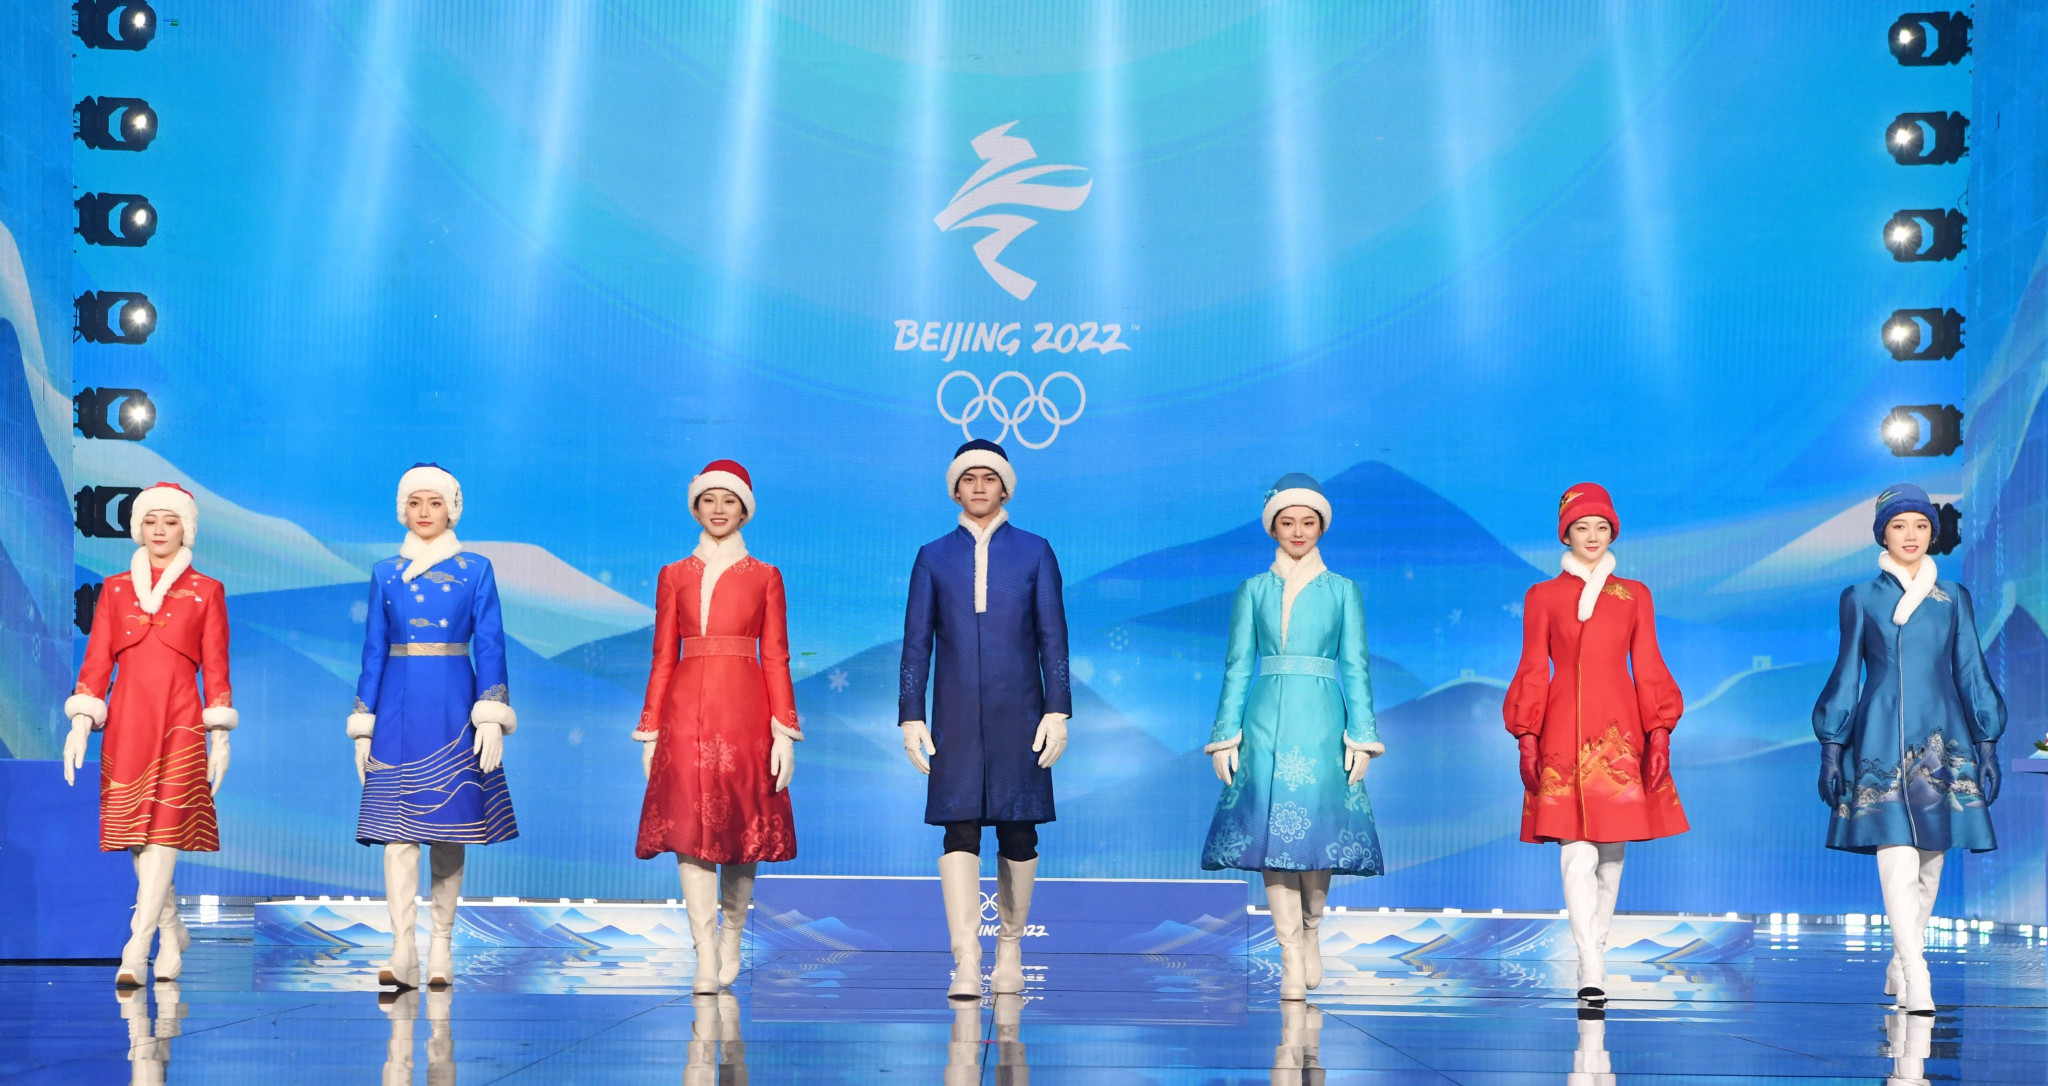 Beijing 2022 has revealed what escorts and the bearers of medal trays will wear during medal ceremonies ©Twitter/Beijing2022